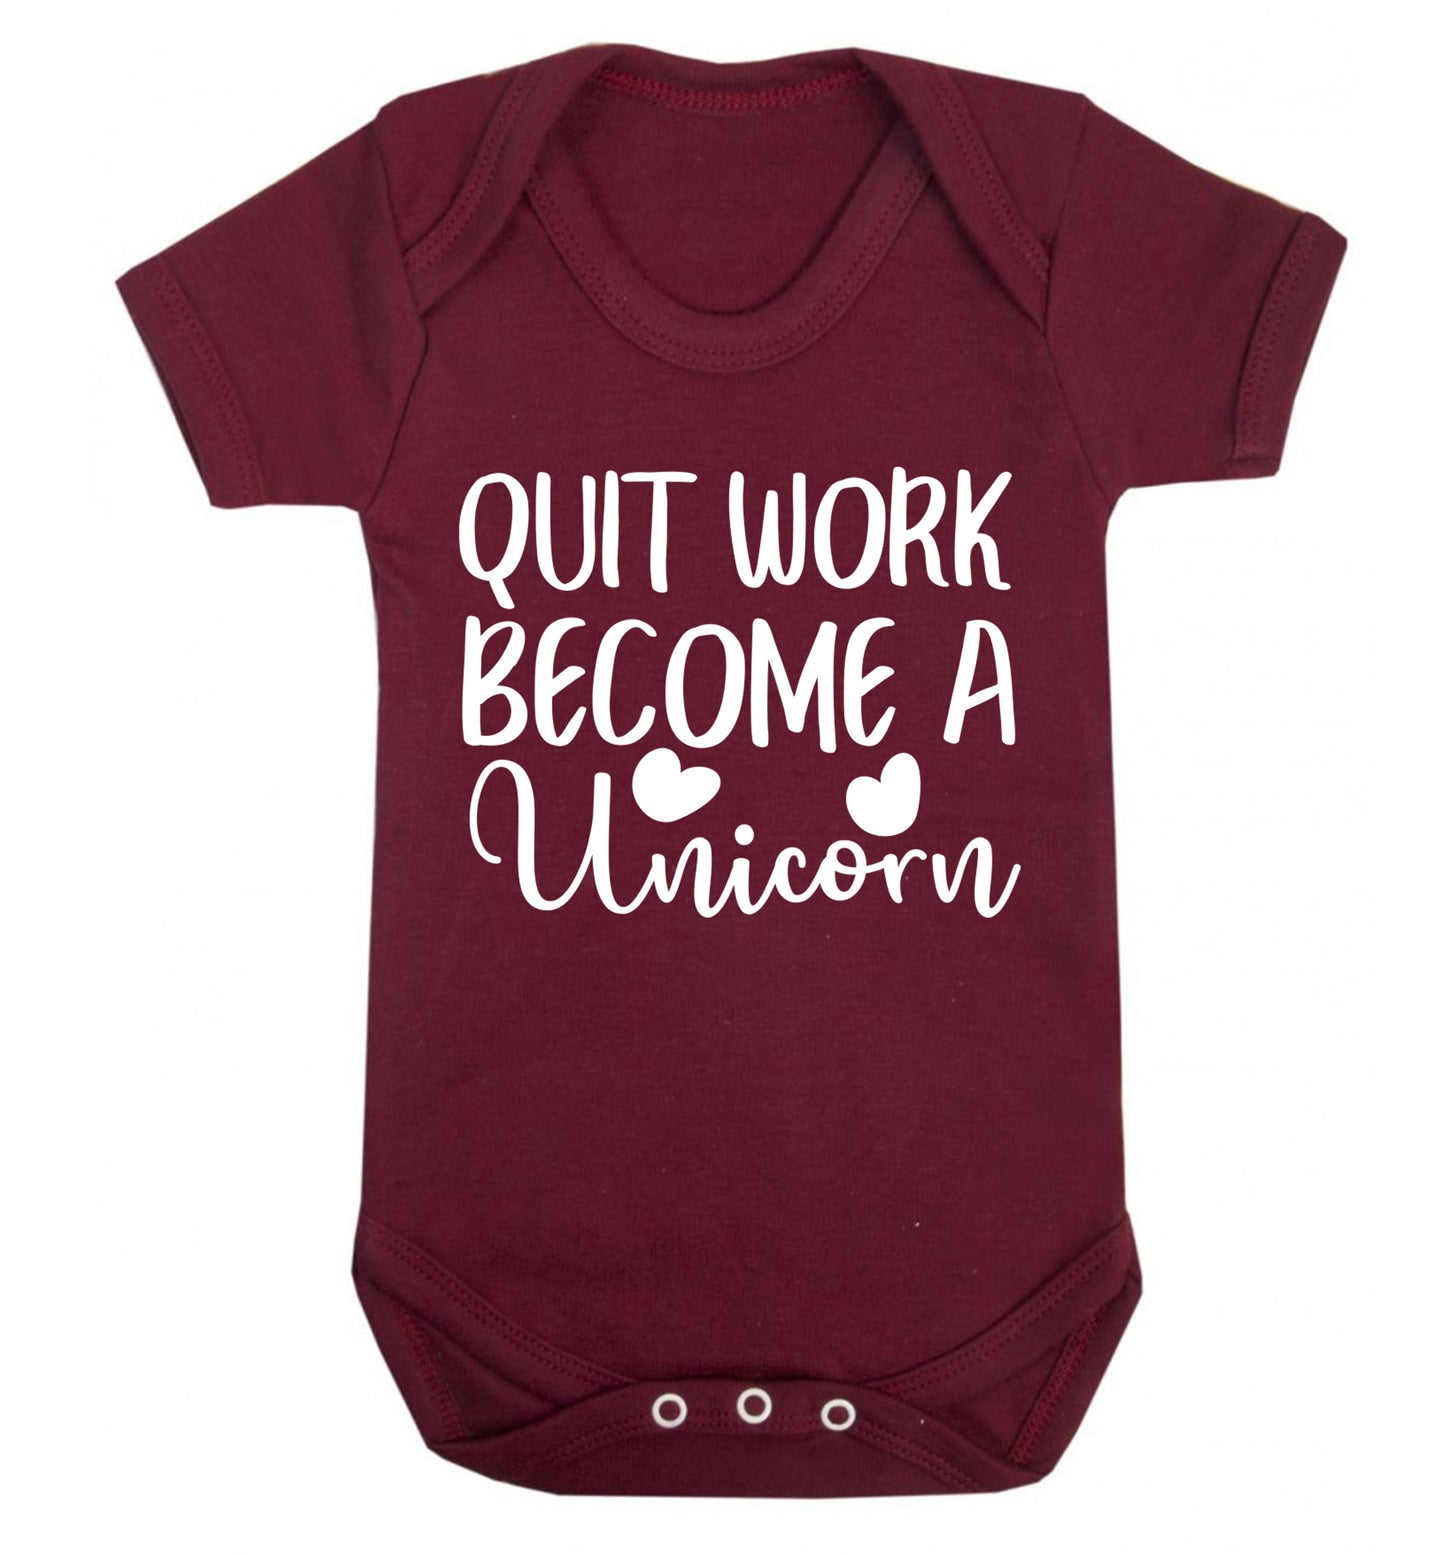 Quit work become a unicorn Baby Vest maroon 18-24 months